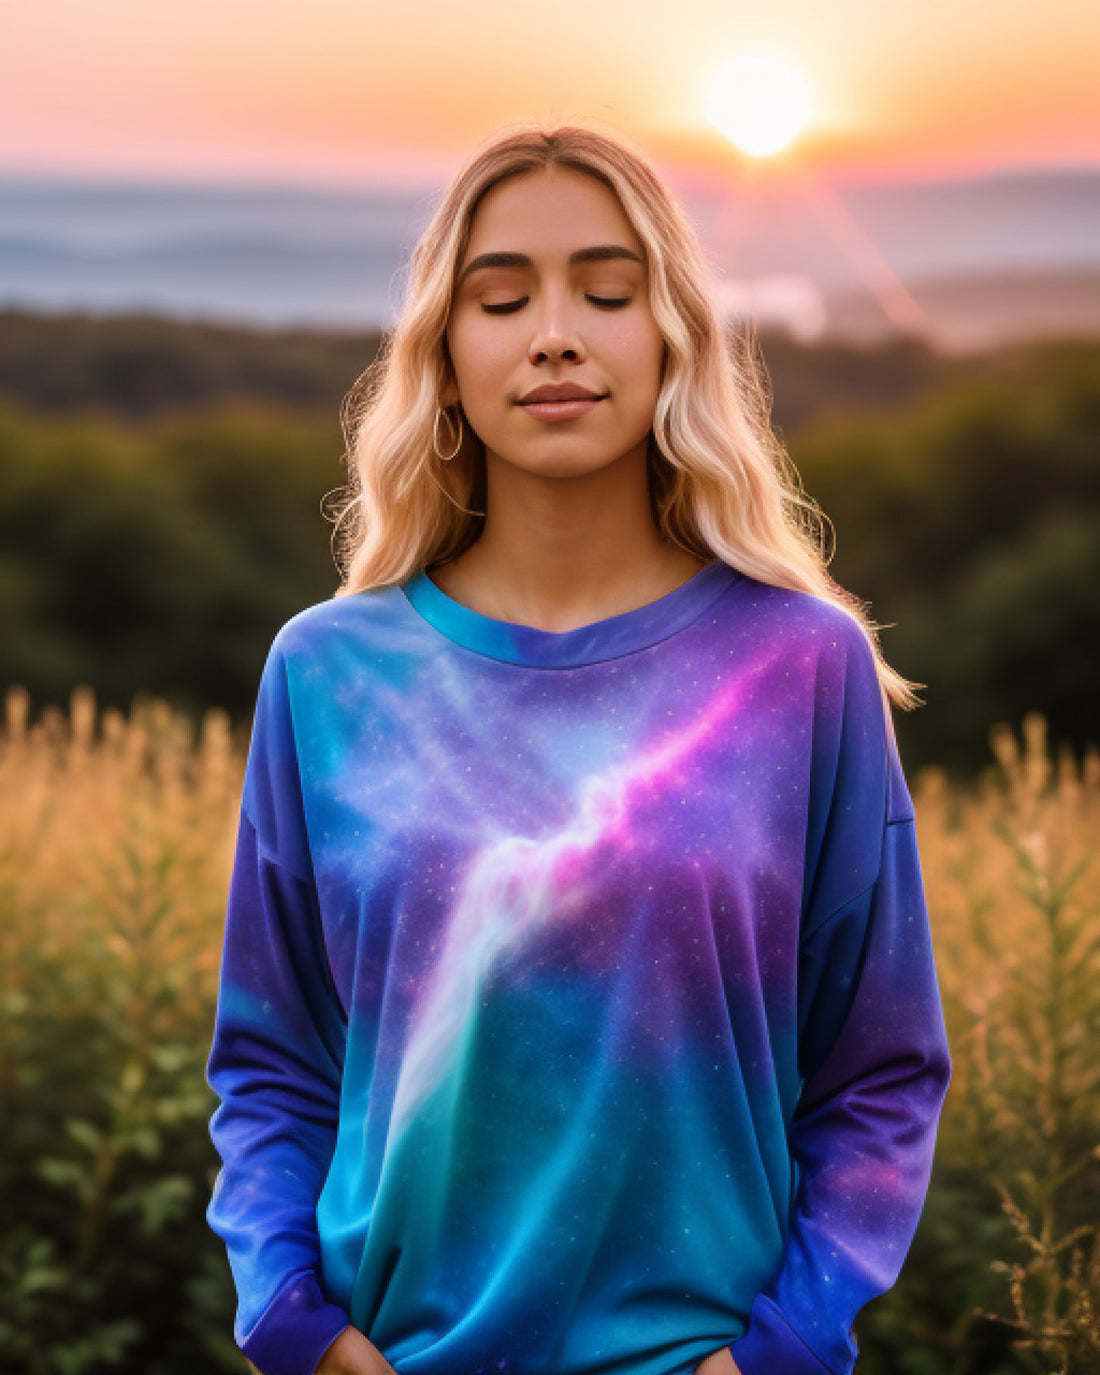 The Nebula Palace - Illuminating the Path Within: How Spirituality Guides the Journey of Self-Understanding - Smiling girl wearing a vibrant nebula-themed shirt, eyes closed, basking in the beauty of a sunset-lit field.